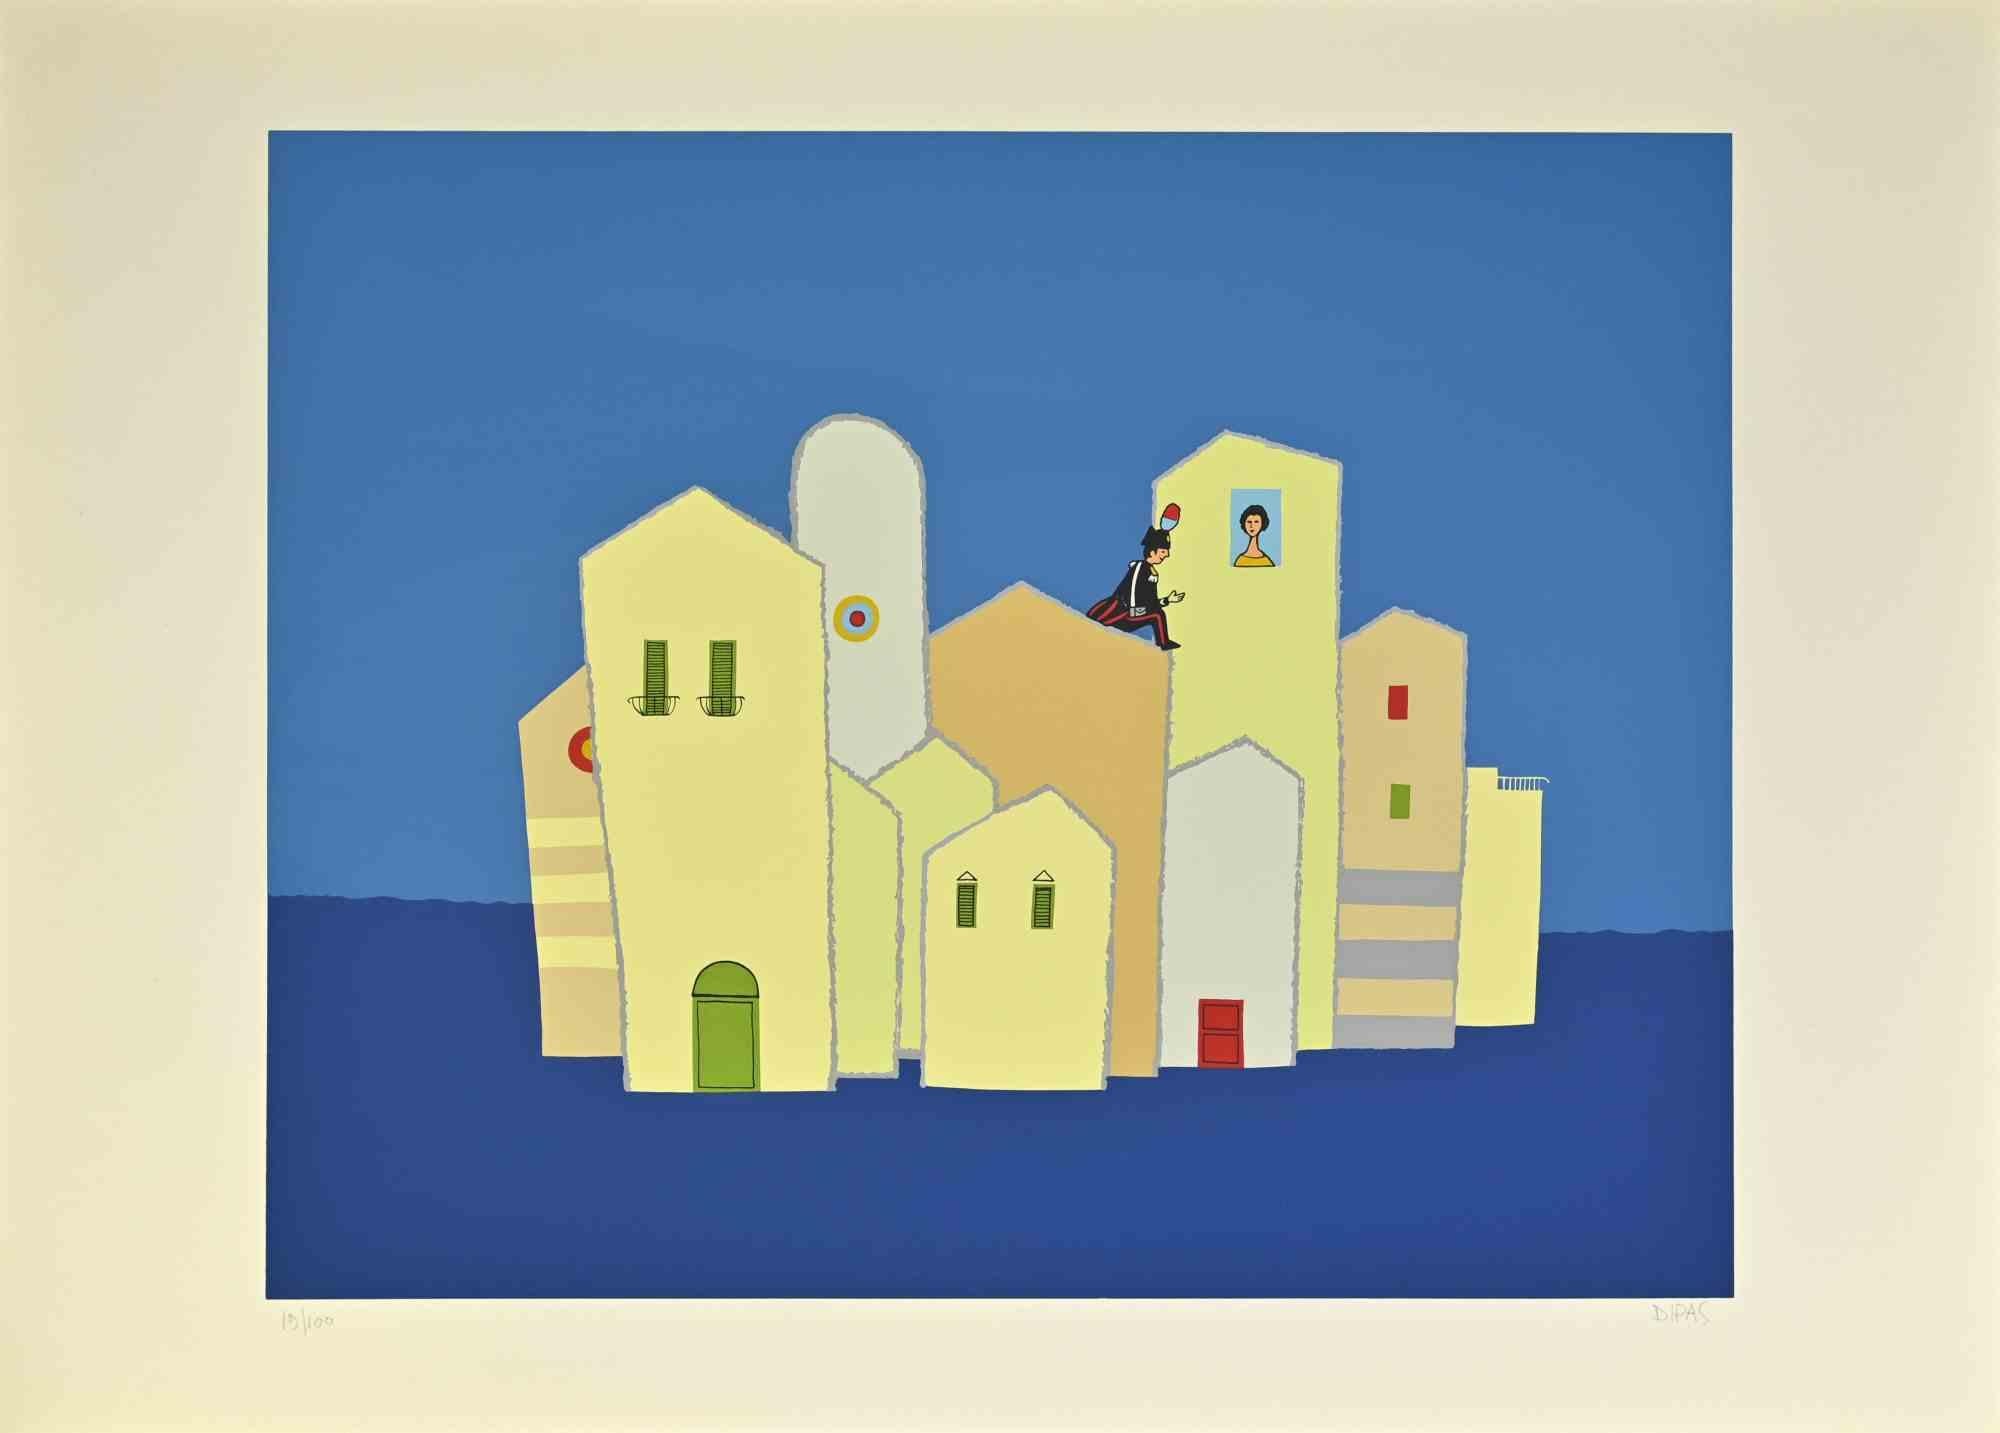 At the window is a contemporary artwork realized by the artist Dipas in the 1970s.

Mixed colored screen print.

Hand signed on the lower right margin.

Numbered on the lower left margin.

Edition of 19/100.

Yellowing paper.